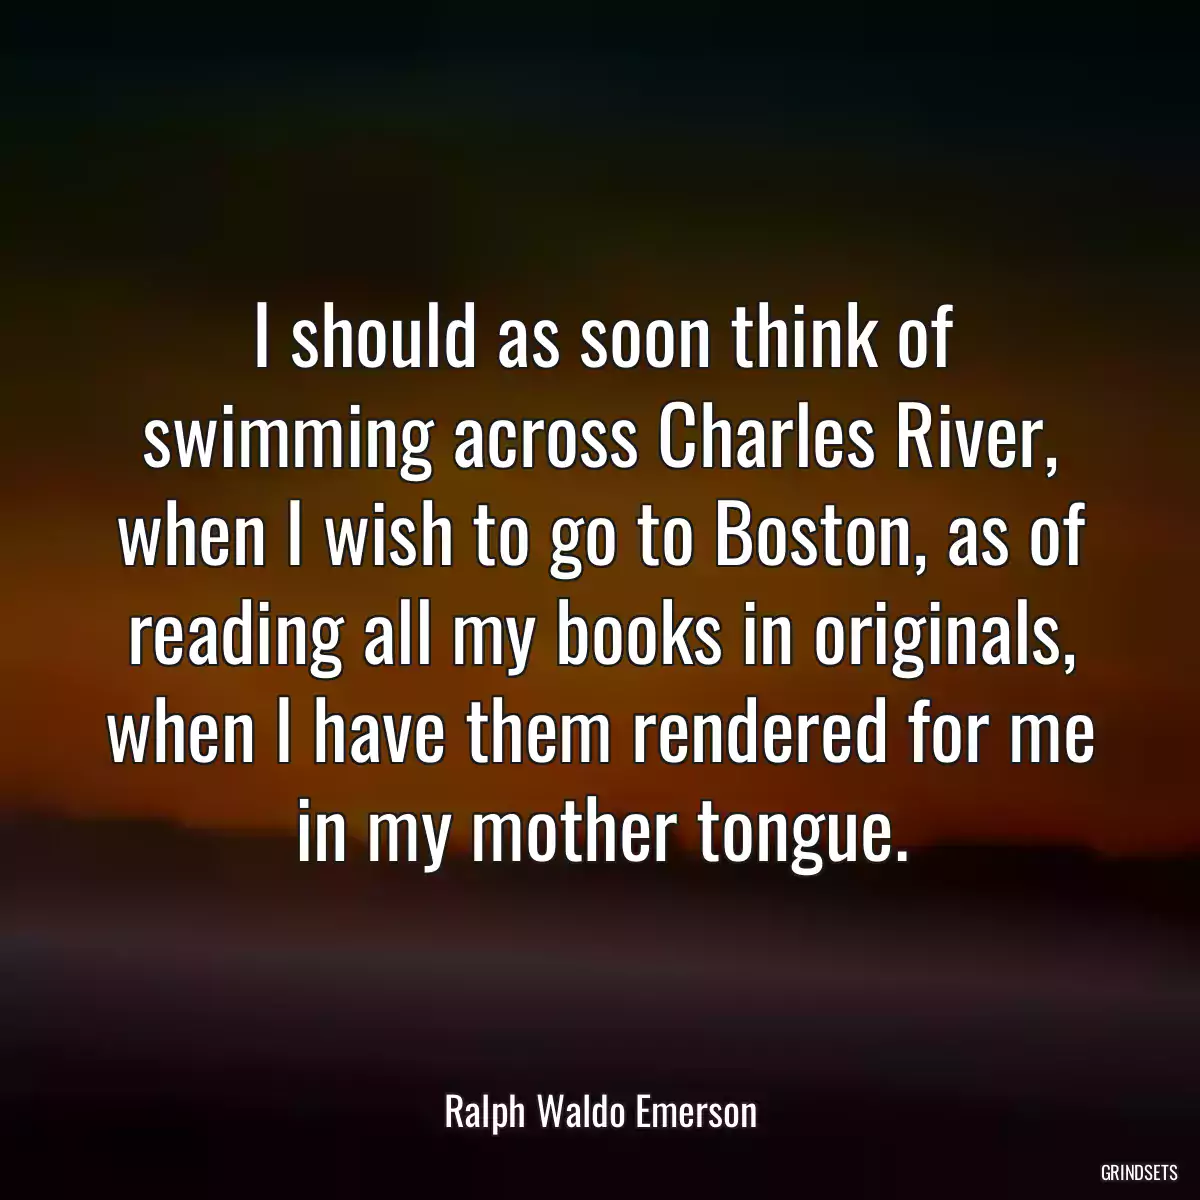 I should as soon think of swimming across Charles River, when I wish to go to Boston, as of reading all my books in originals, when I have them rendered for me in my mother tongue.